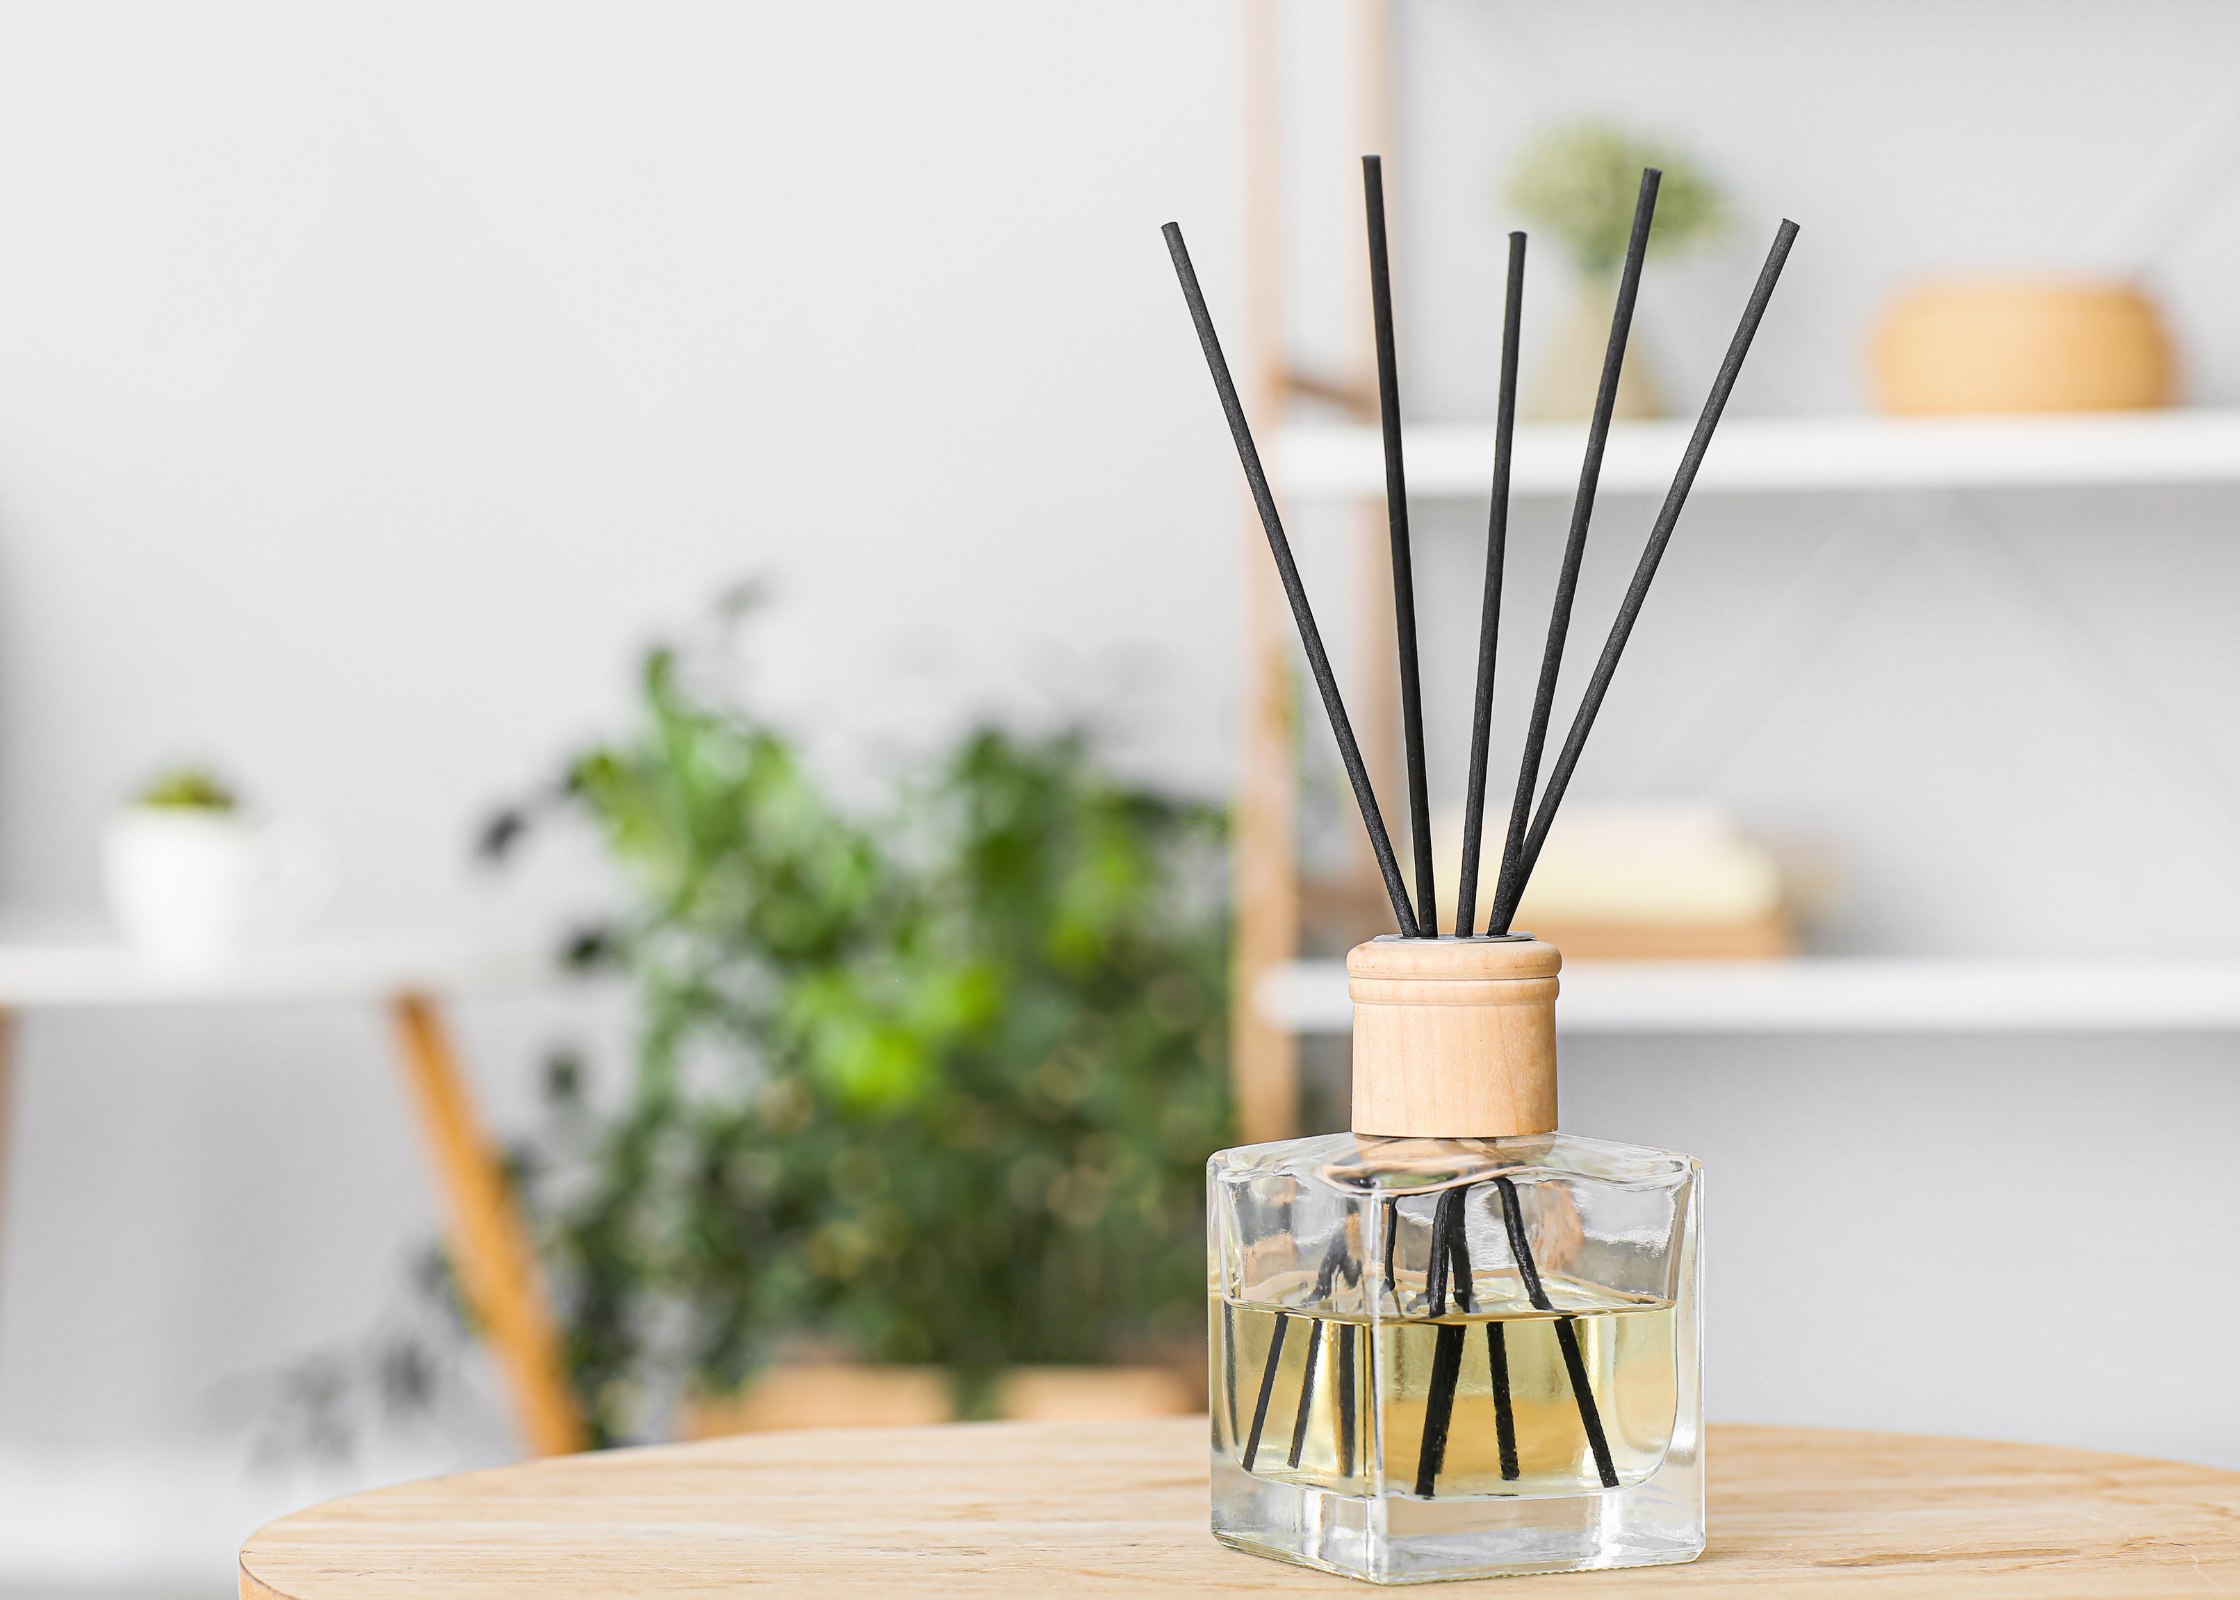 scents and diffusers. Spring decor ideas. decorating for spring. decor for spring. How to update your home for spring. resfresh home. get home spring ready. how to transition your home from winter to spring